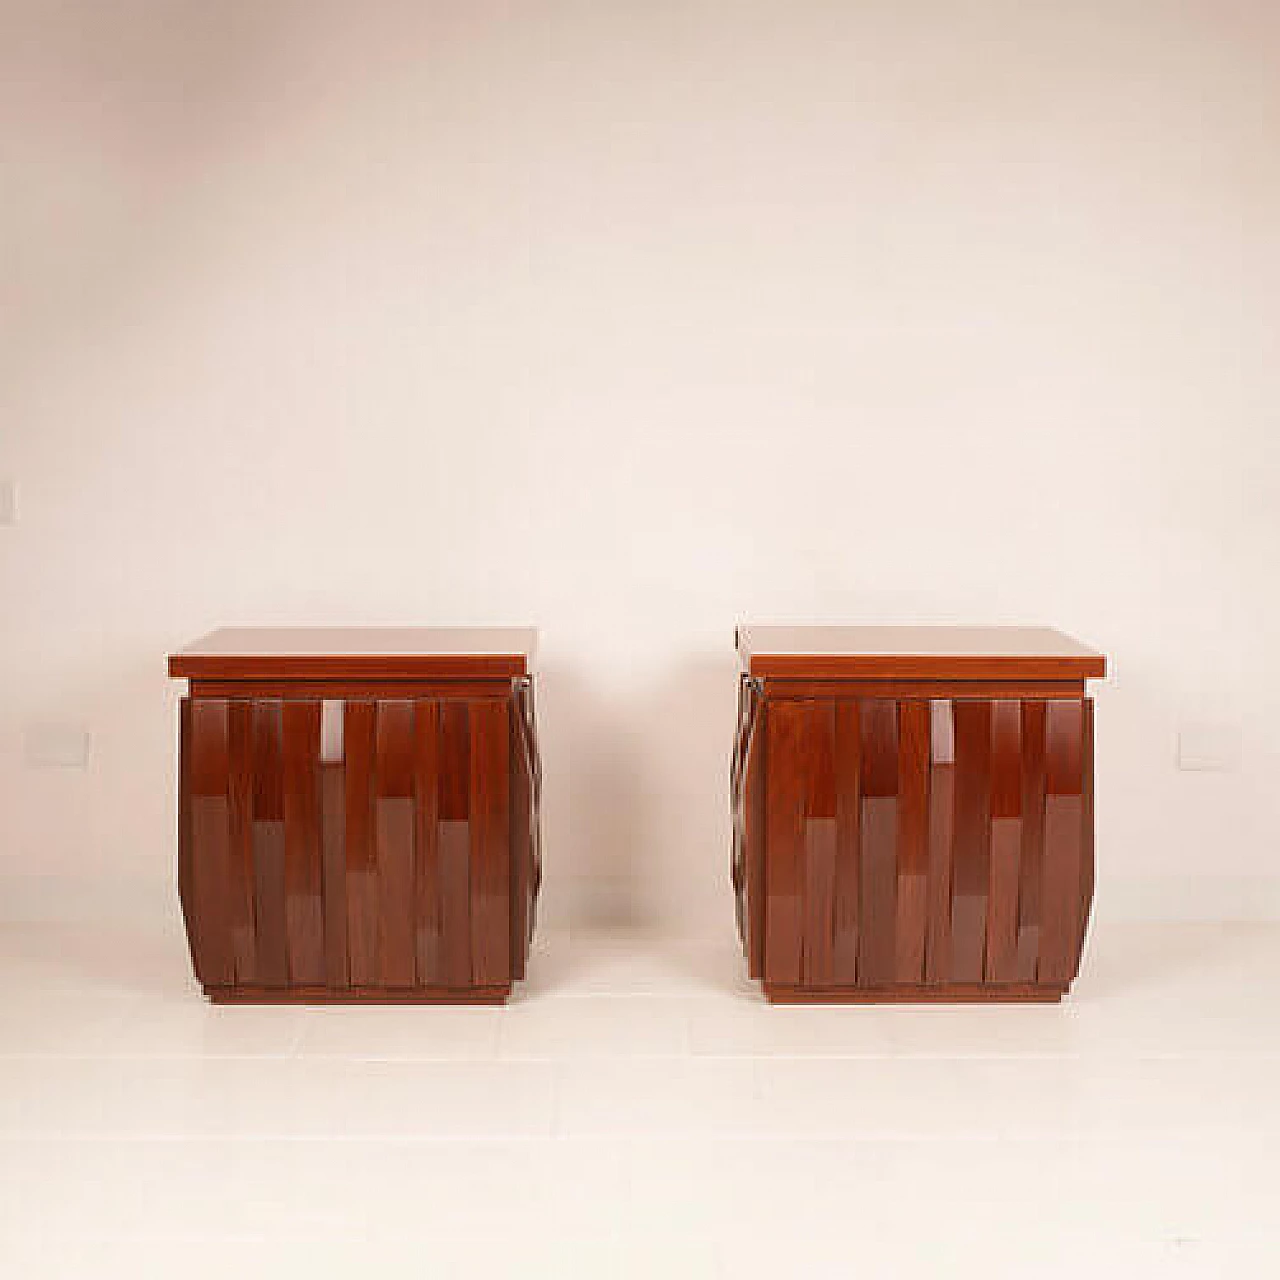 Pair of Barium solid walnut bedside tables by Luciano Frigerio for Frigerio di Desio, 1970s 9